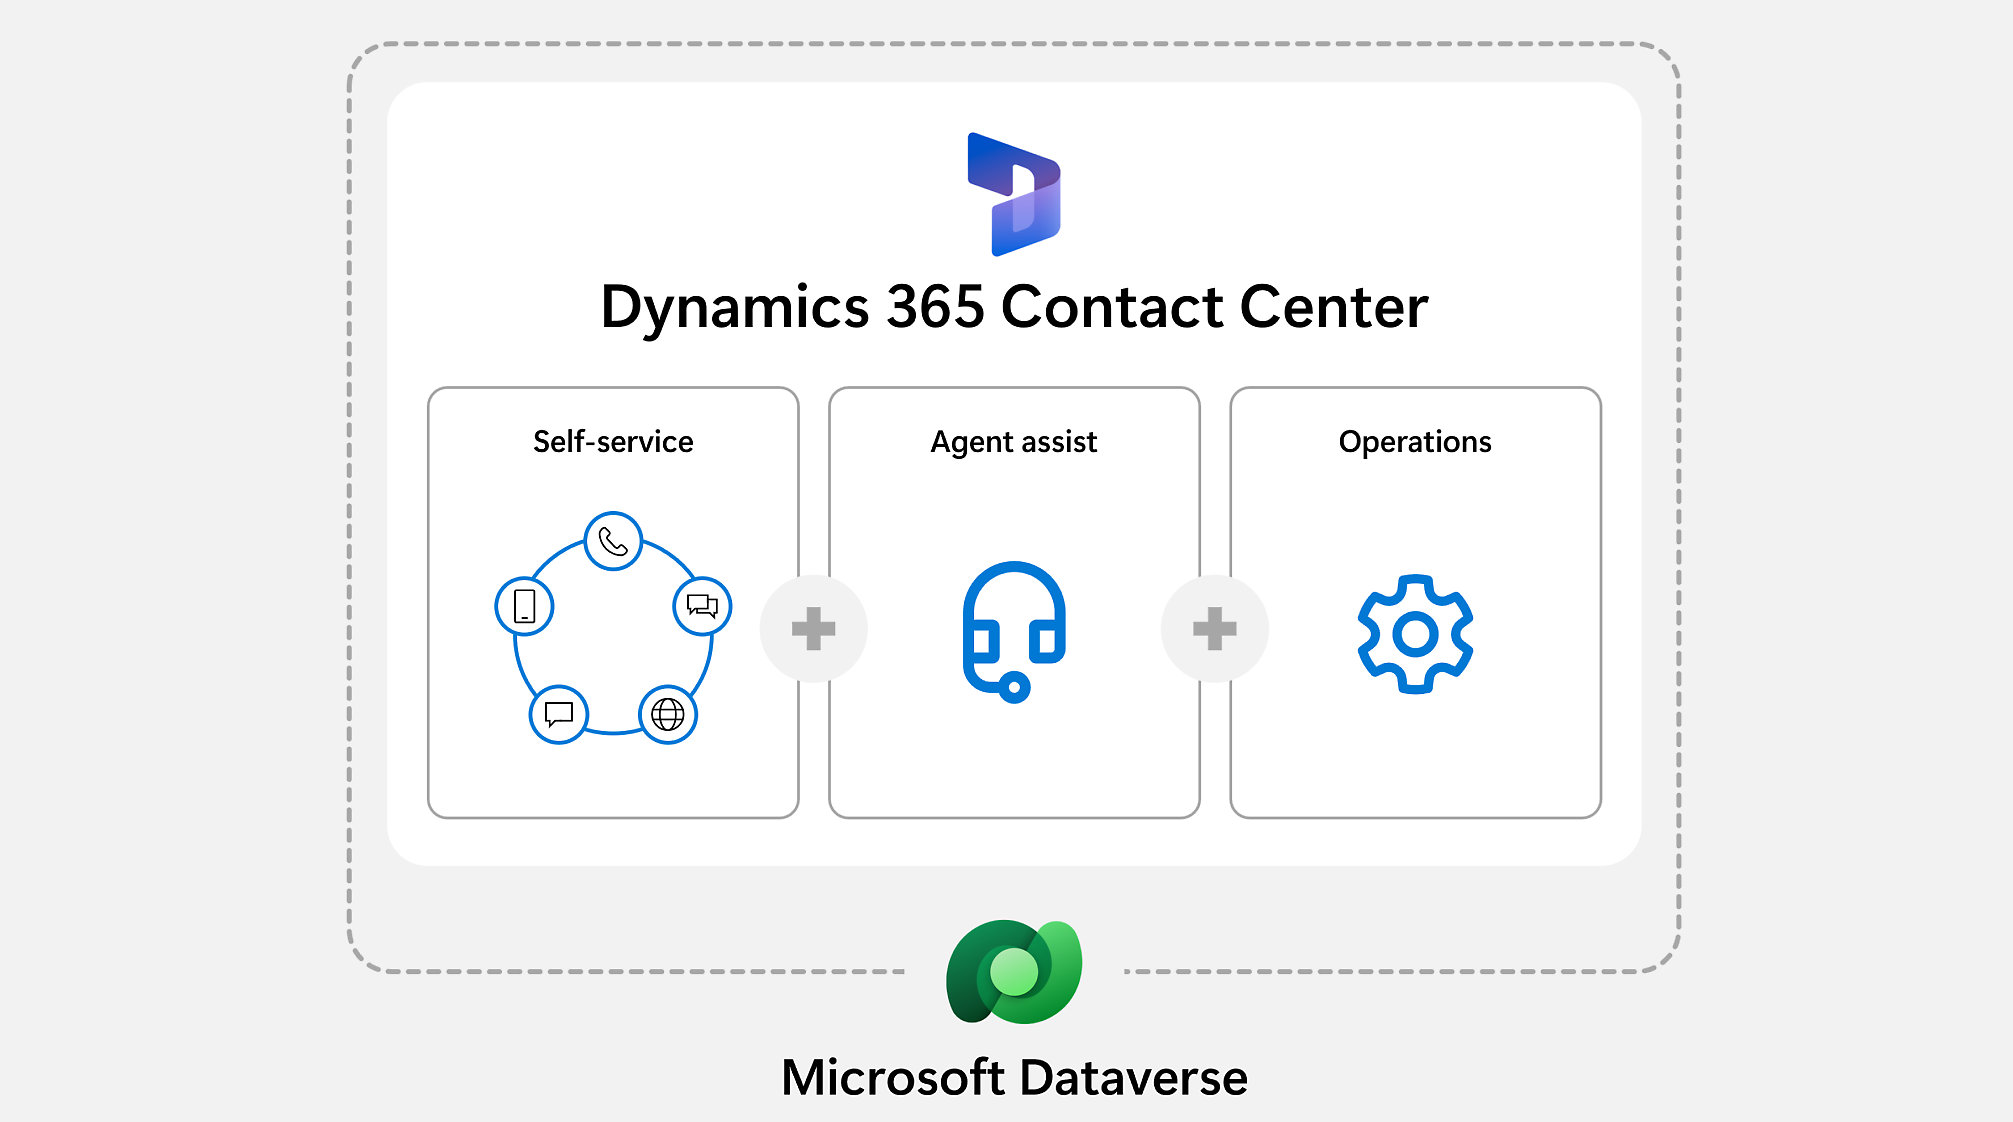 Diagram illustrating Dynamics 365 Contact Center, featuring three main components: Self-service, Agent assist, and Operations